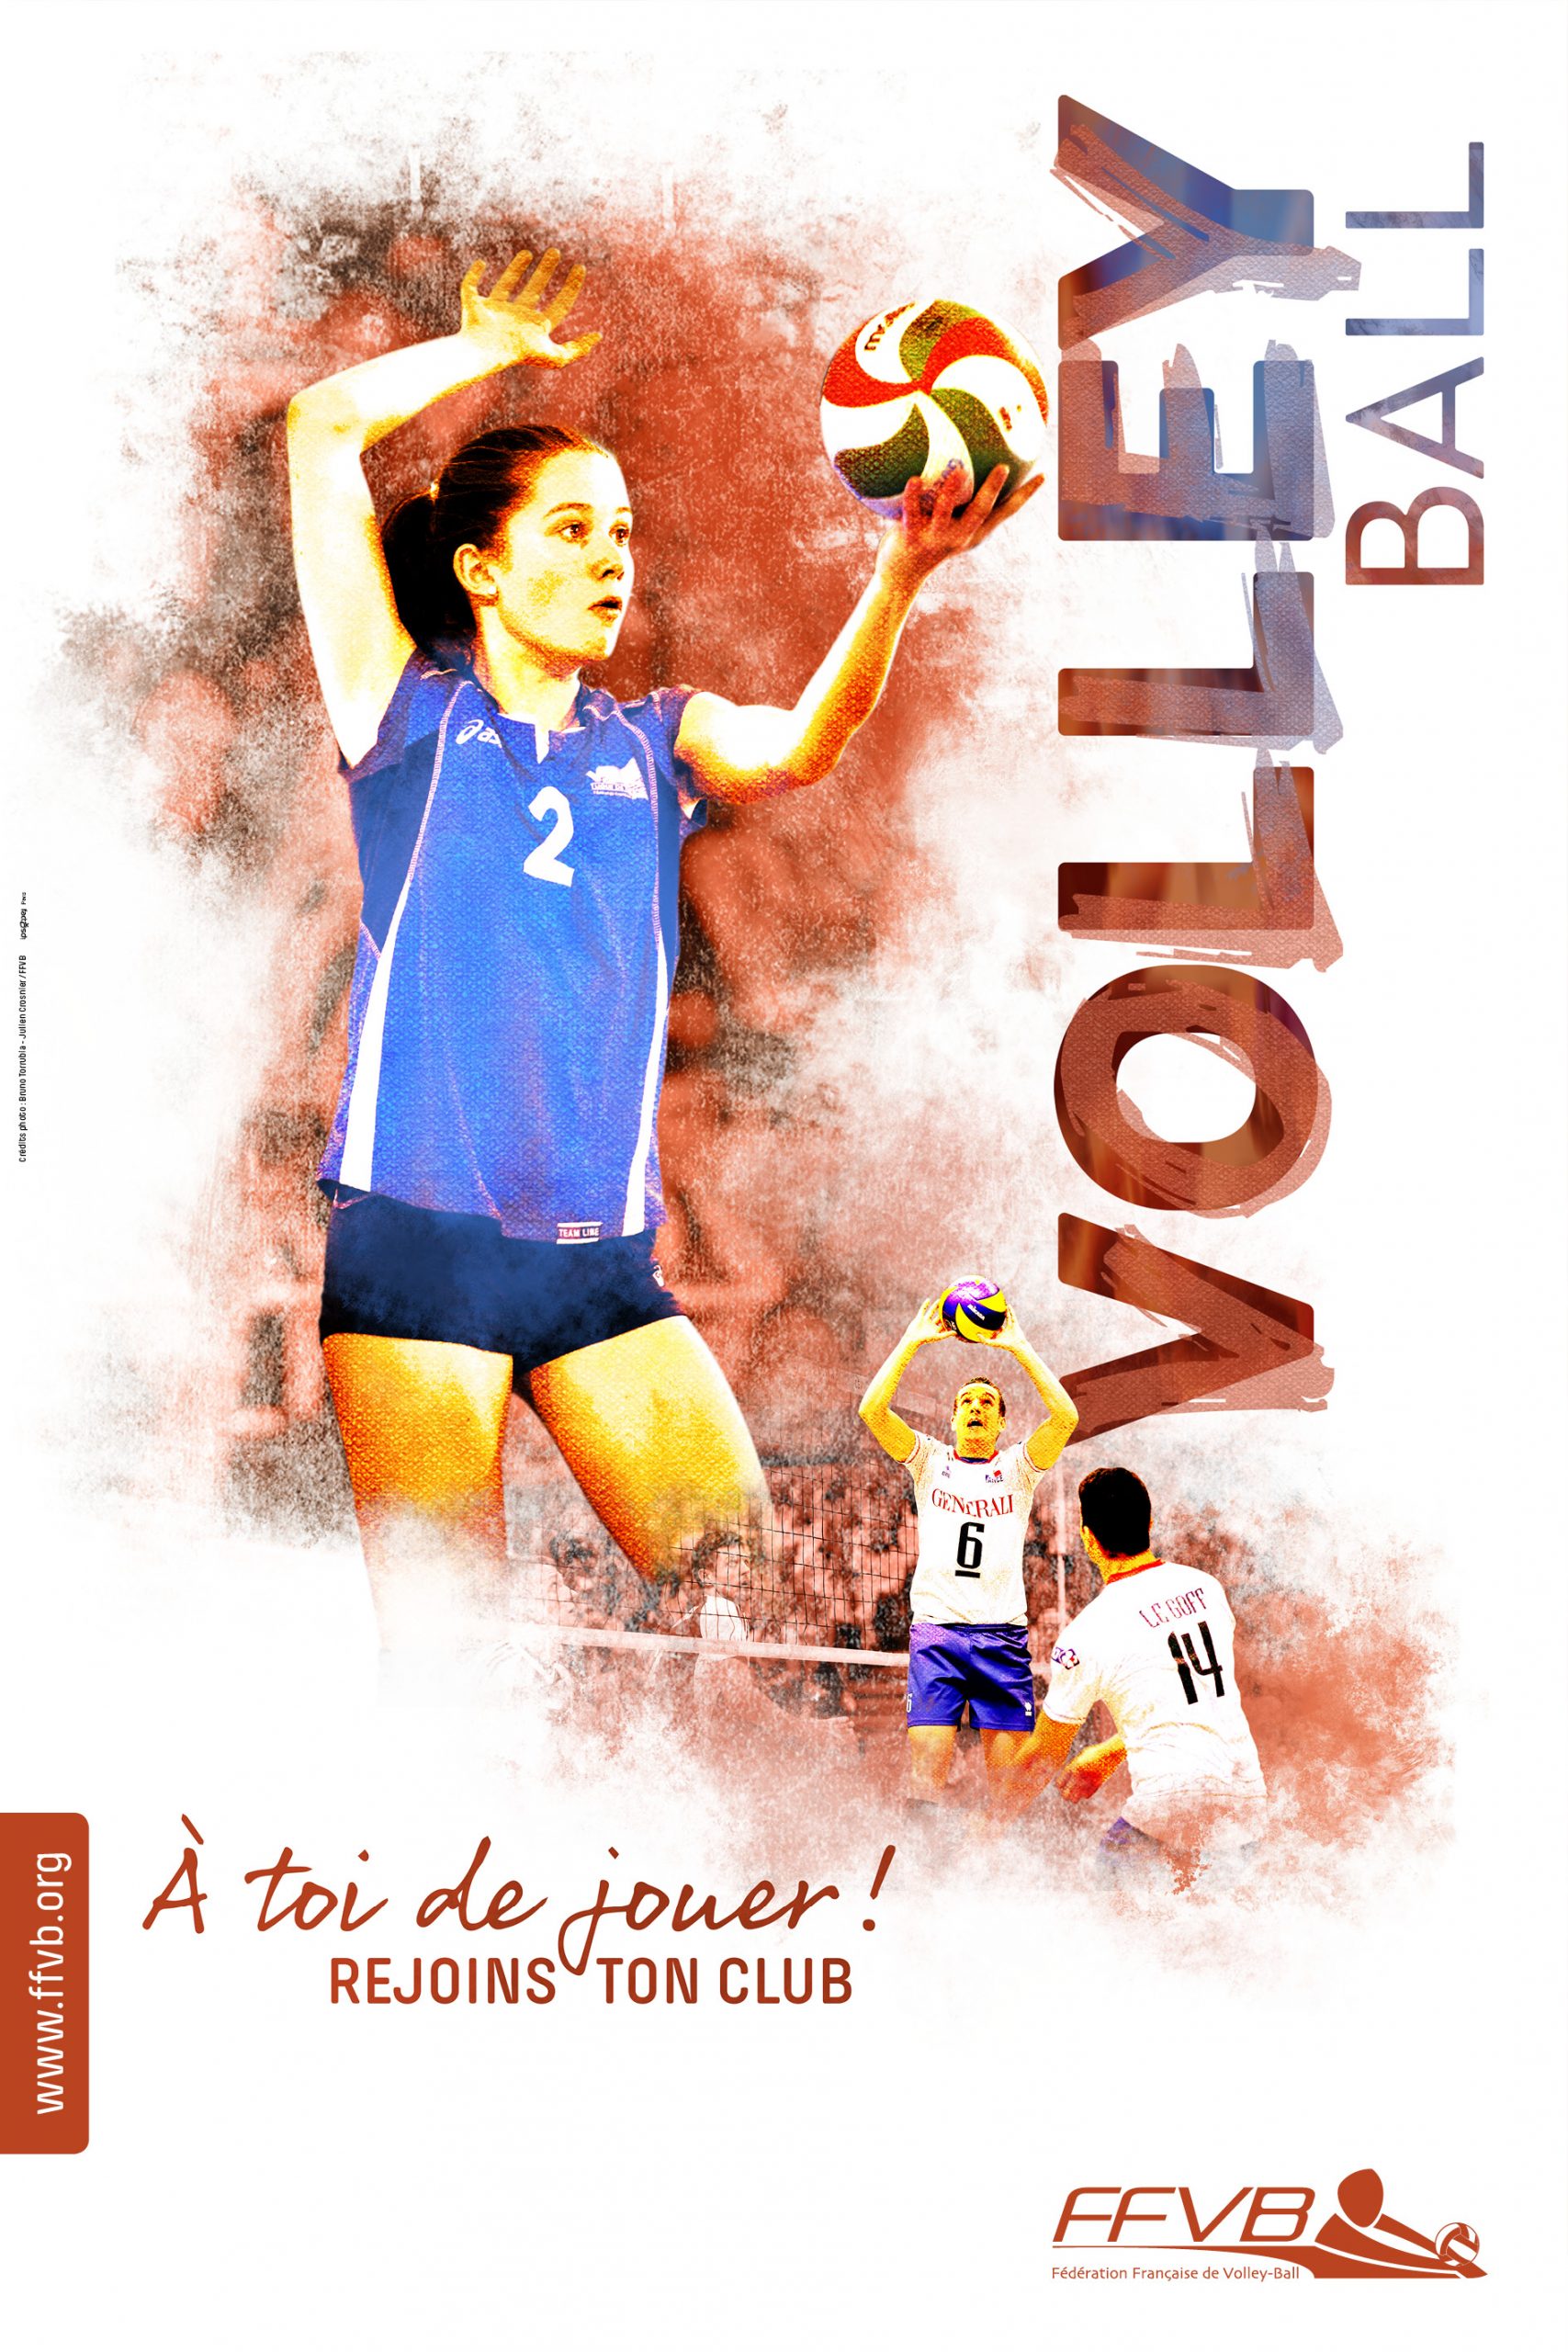 FFVB-Campagne affiches rentrée 2014-2